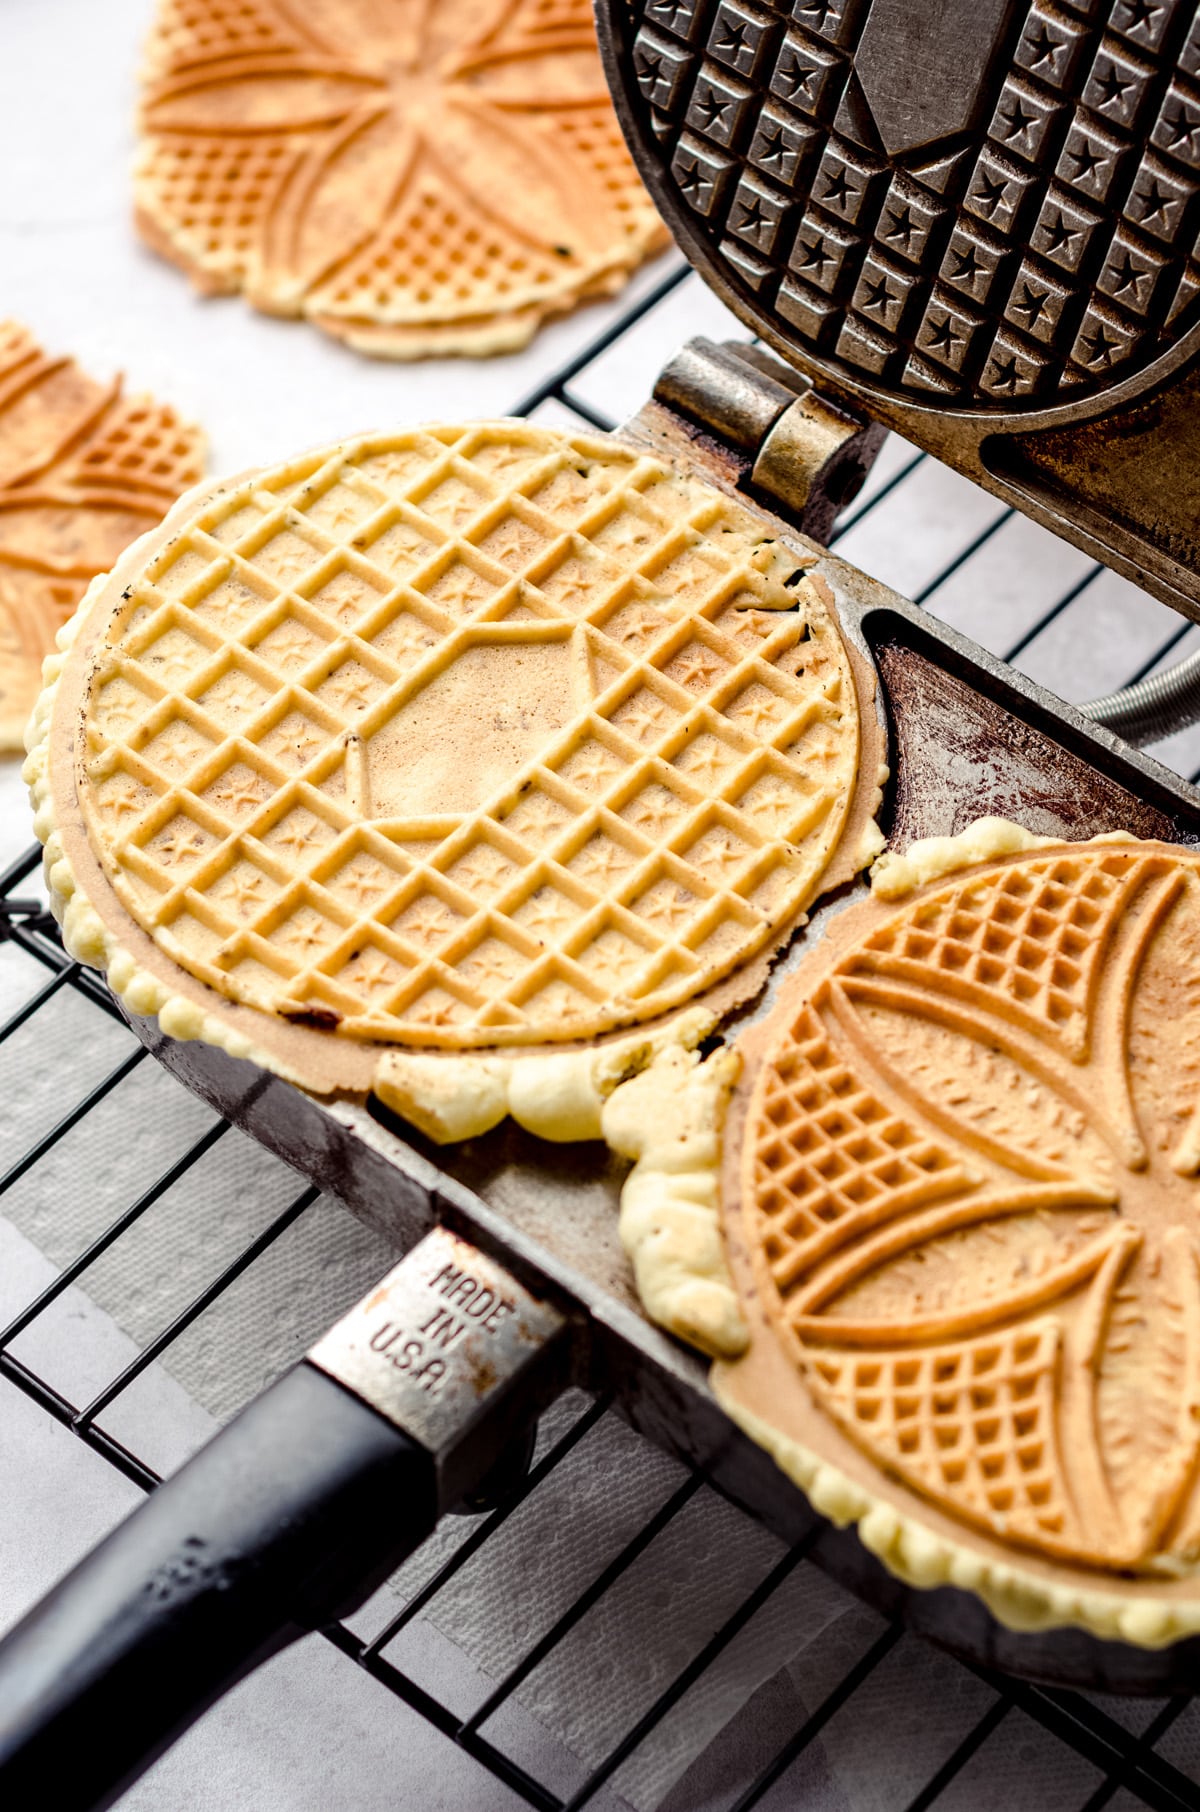 Using a pizzelle iron to make cookies.